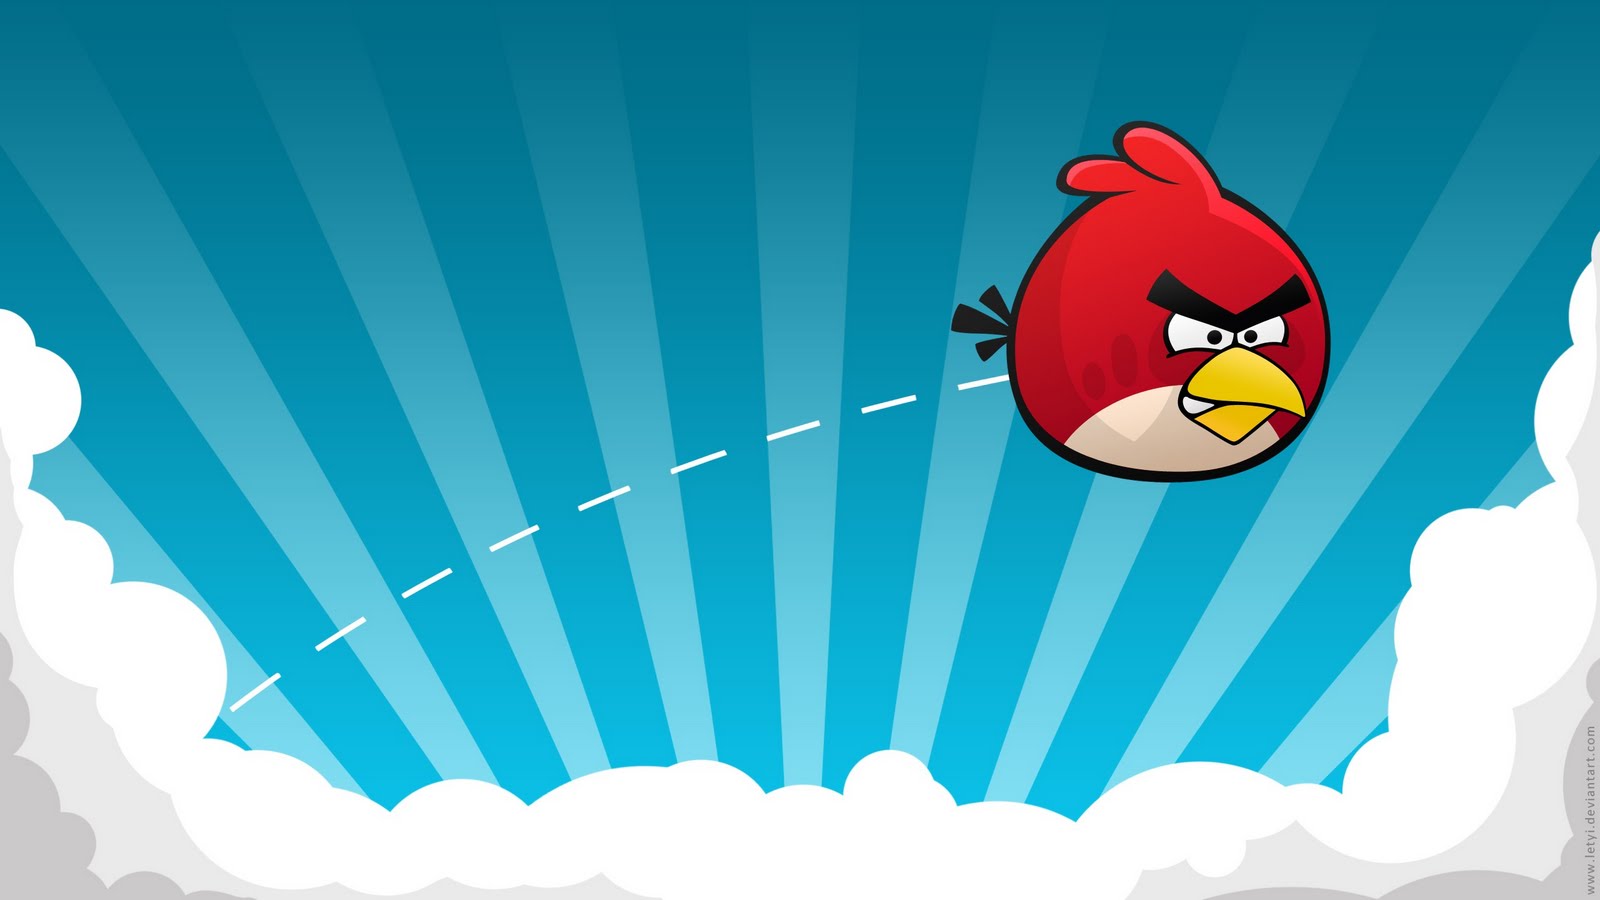 angry birds - Angry Birds Wallpaper (36543022) - Fanpop